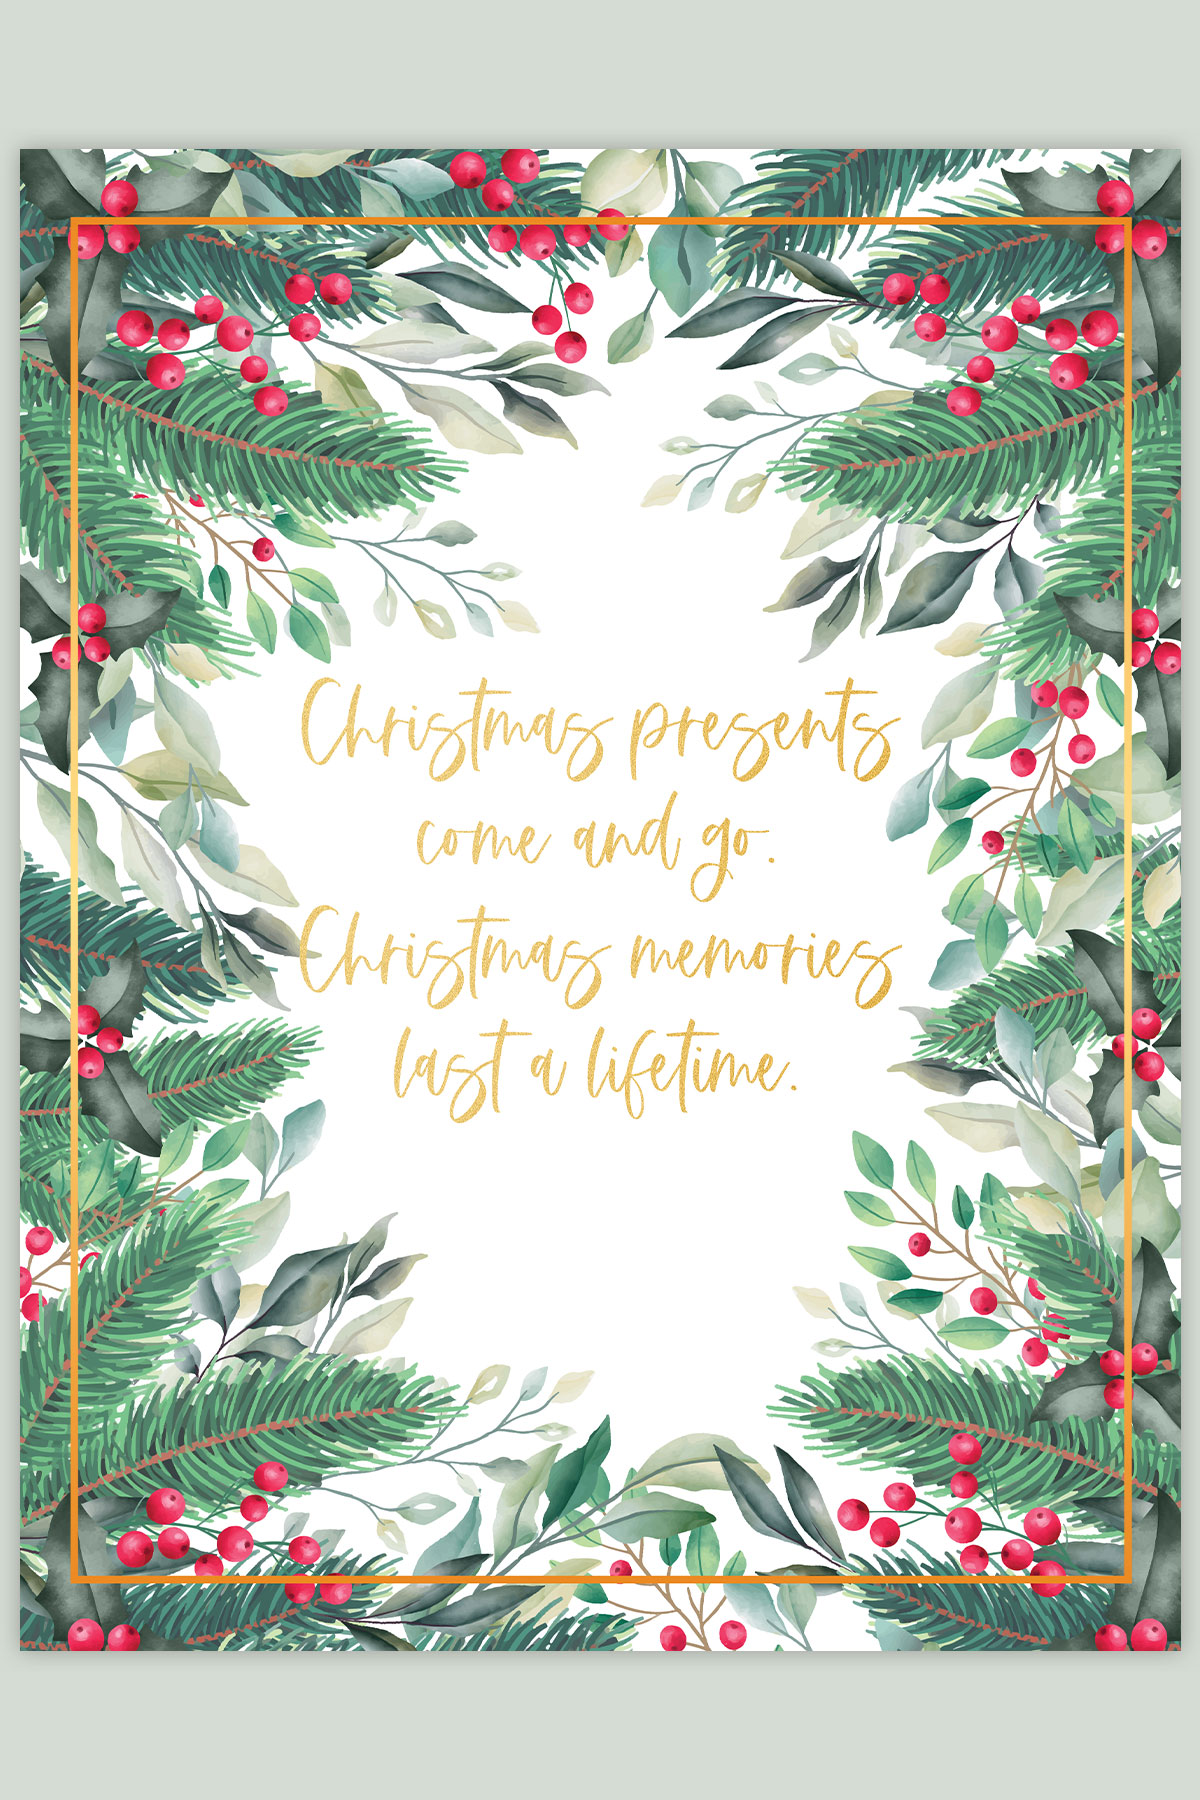 This image shows one of the free memory book covers. It has a quote that says: Christmas presents come and go. Christmas memories last a lifetime.